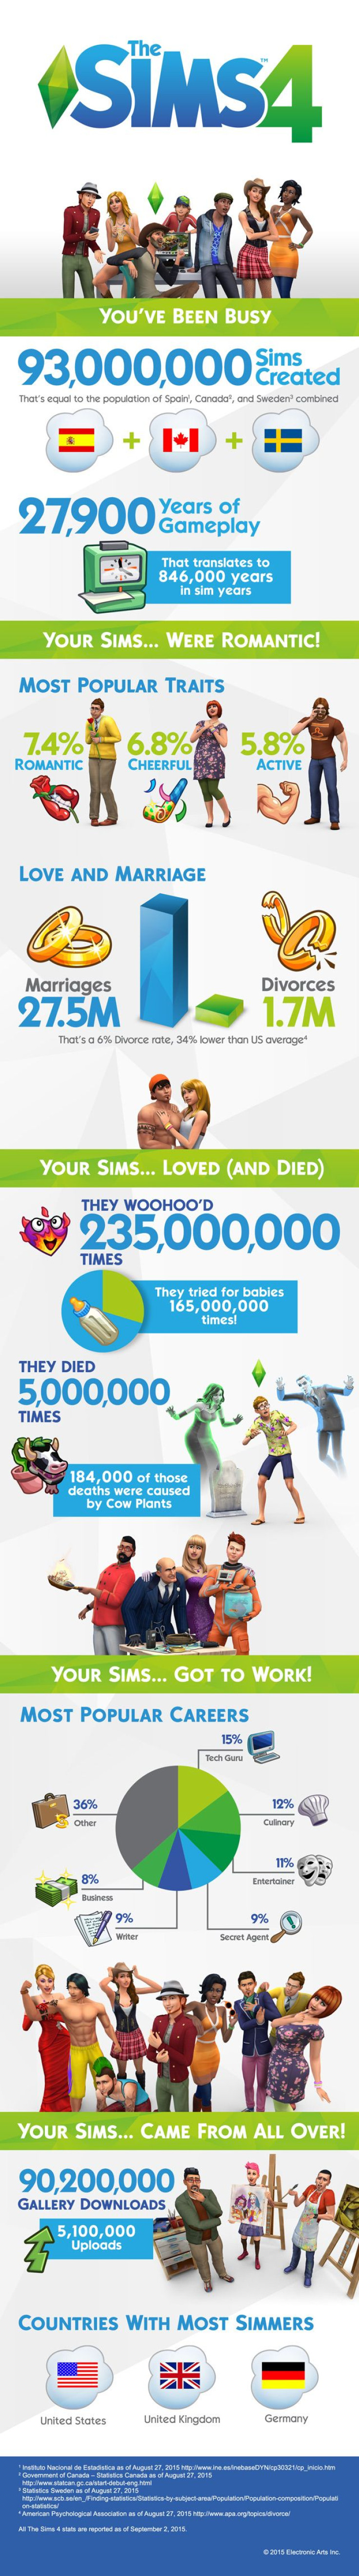 The Sims 4 Infographic